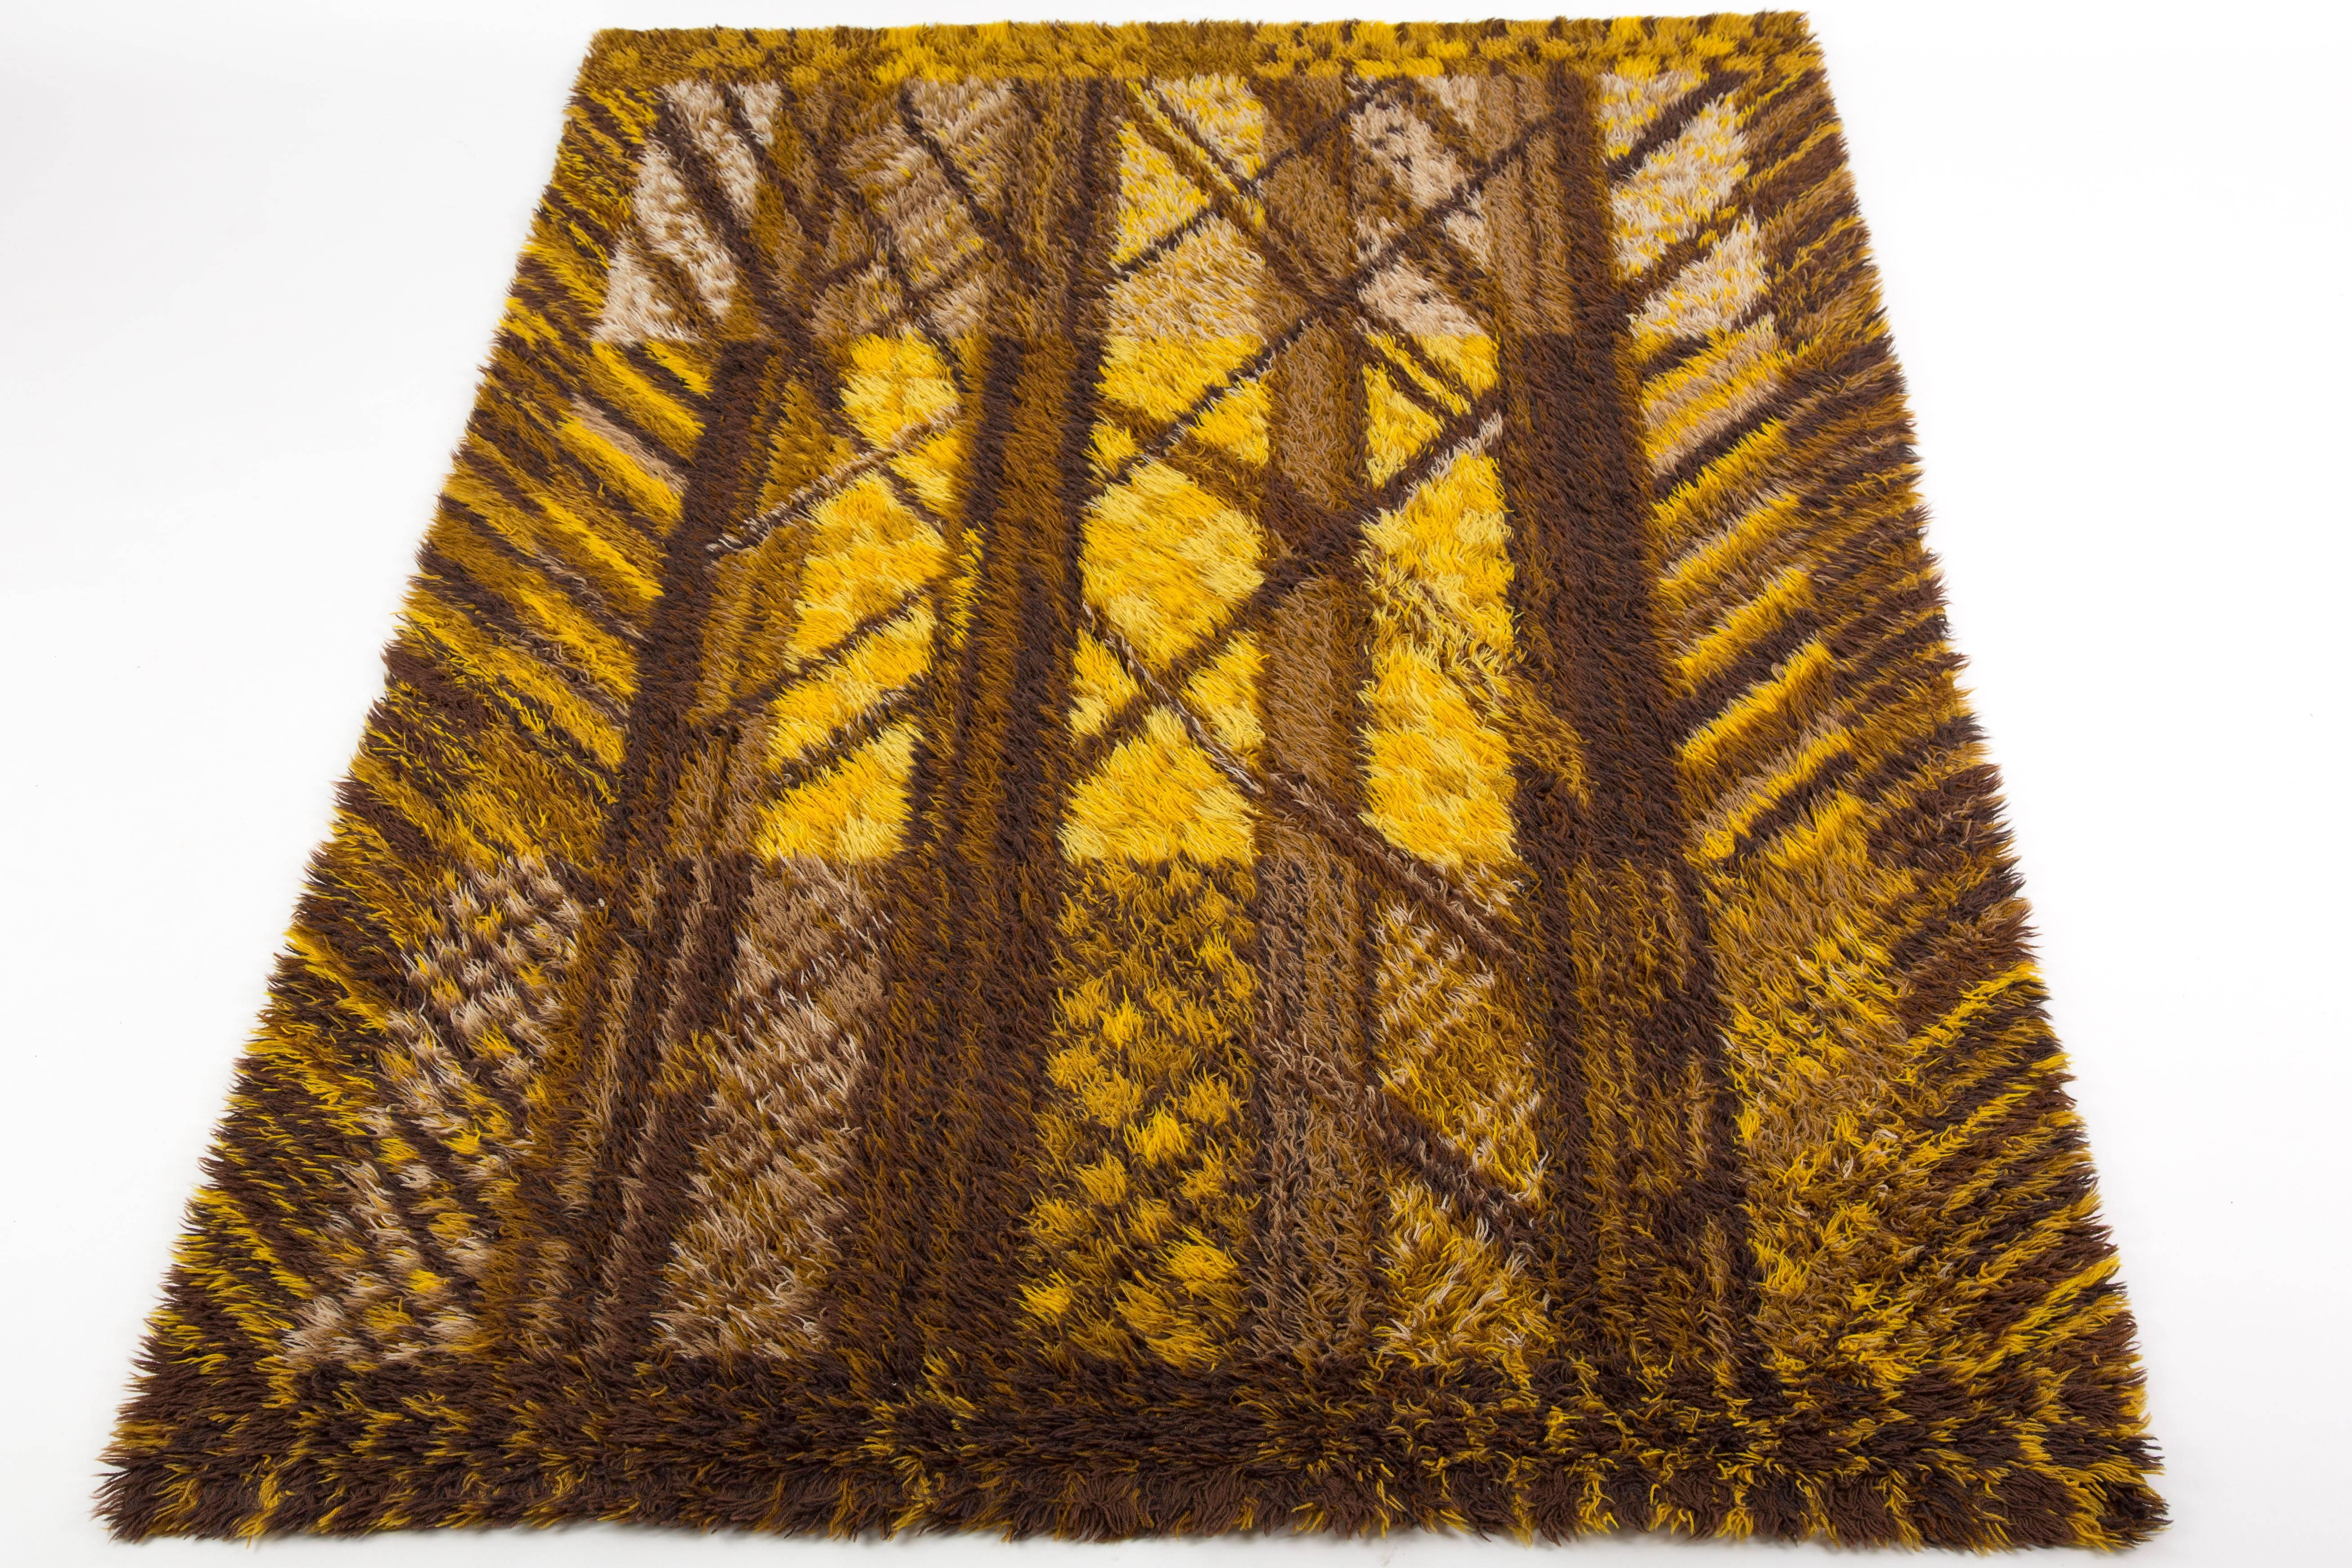 Marianne Richter Carpet. Marianne Richter designed this carpet forest of wool, Sweden. Measures: 170cm by 230cm. Marked with her name and company.